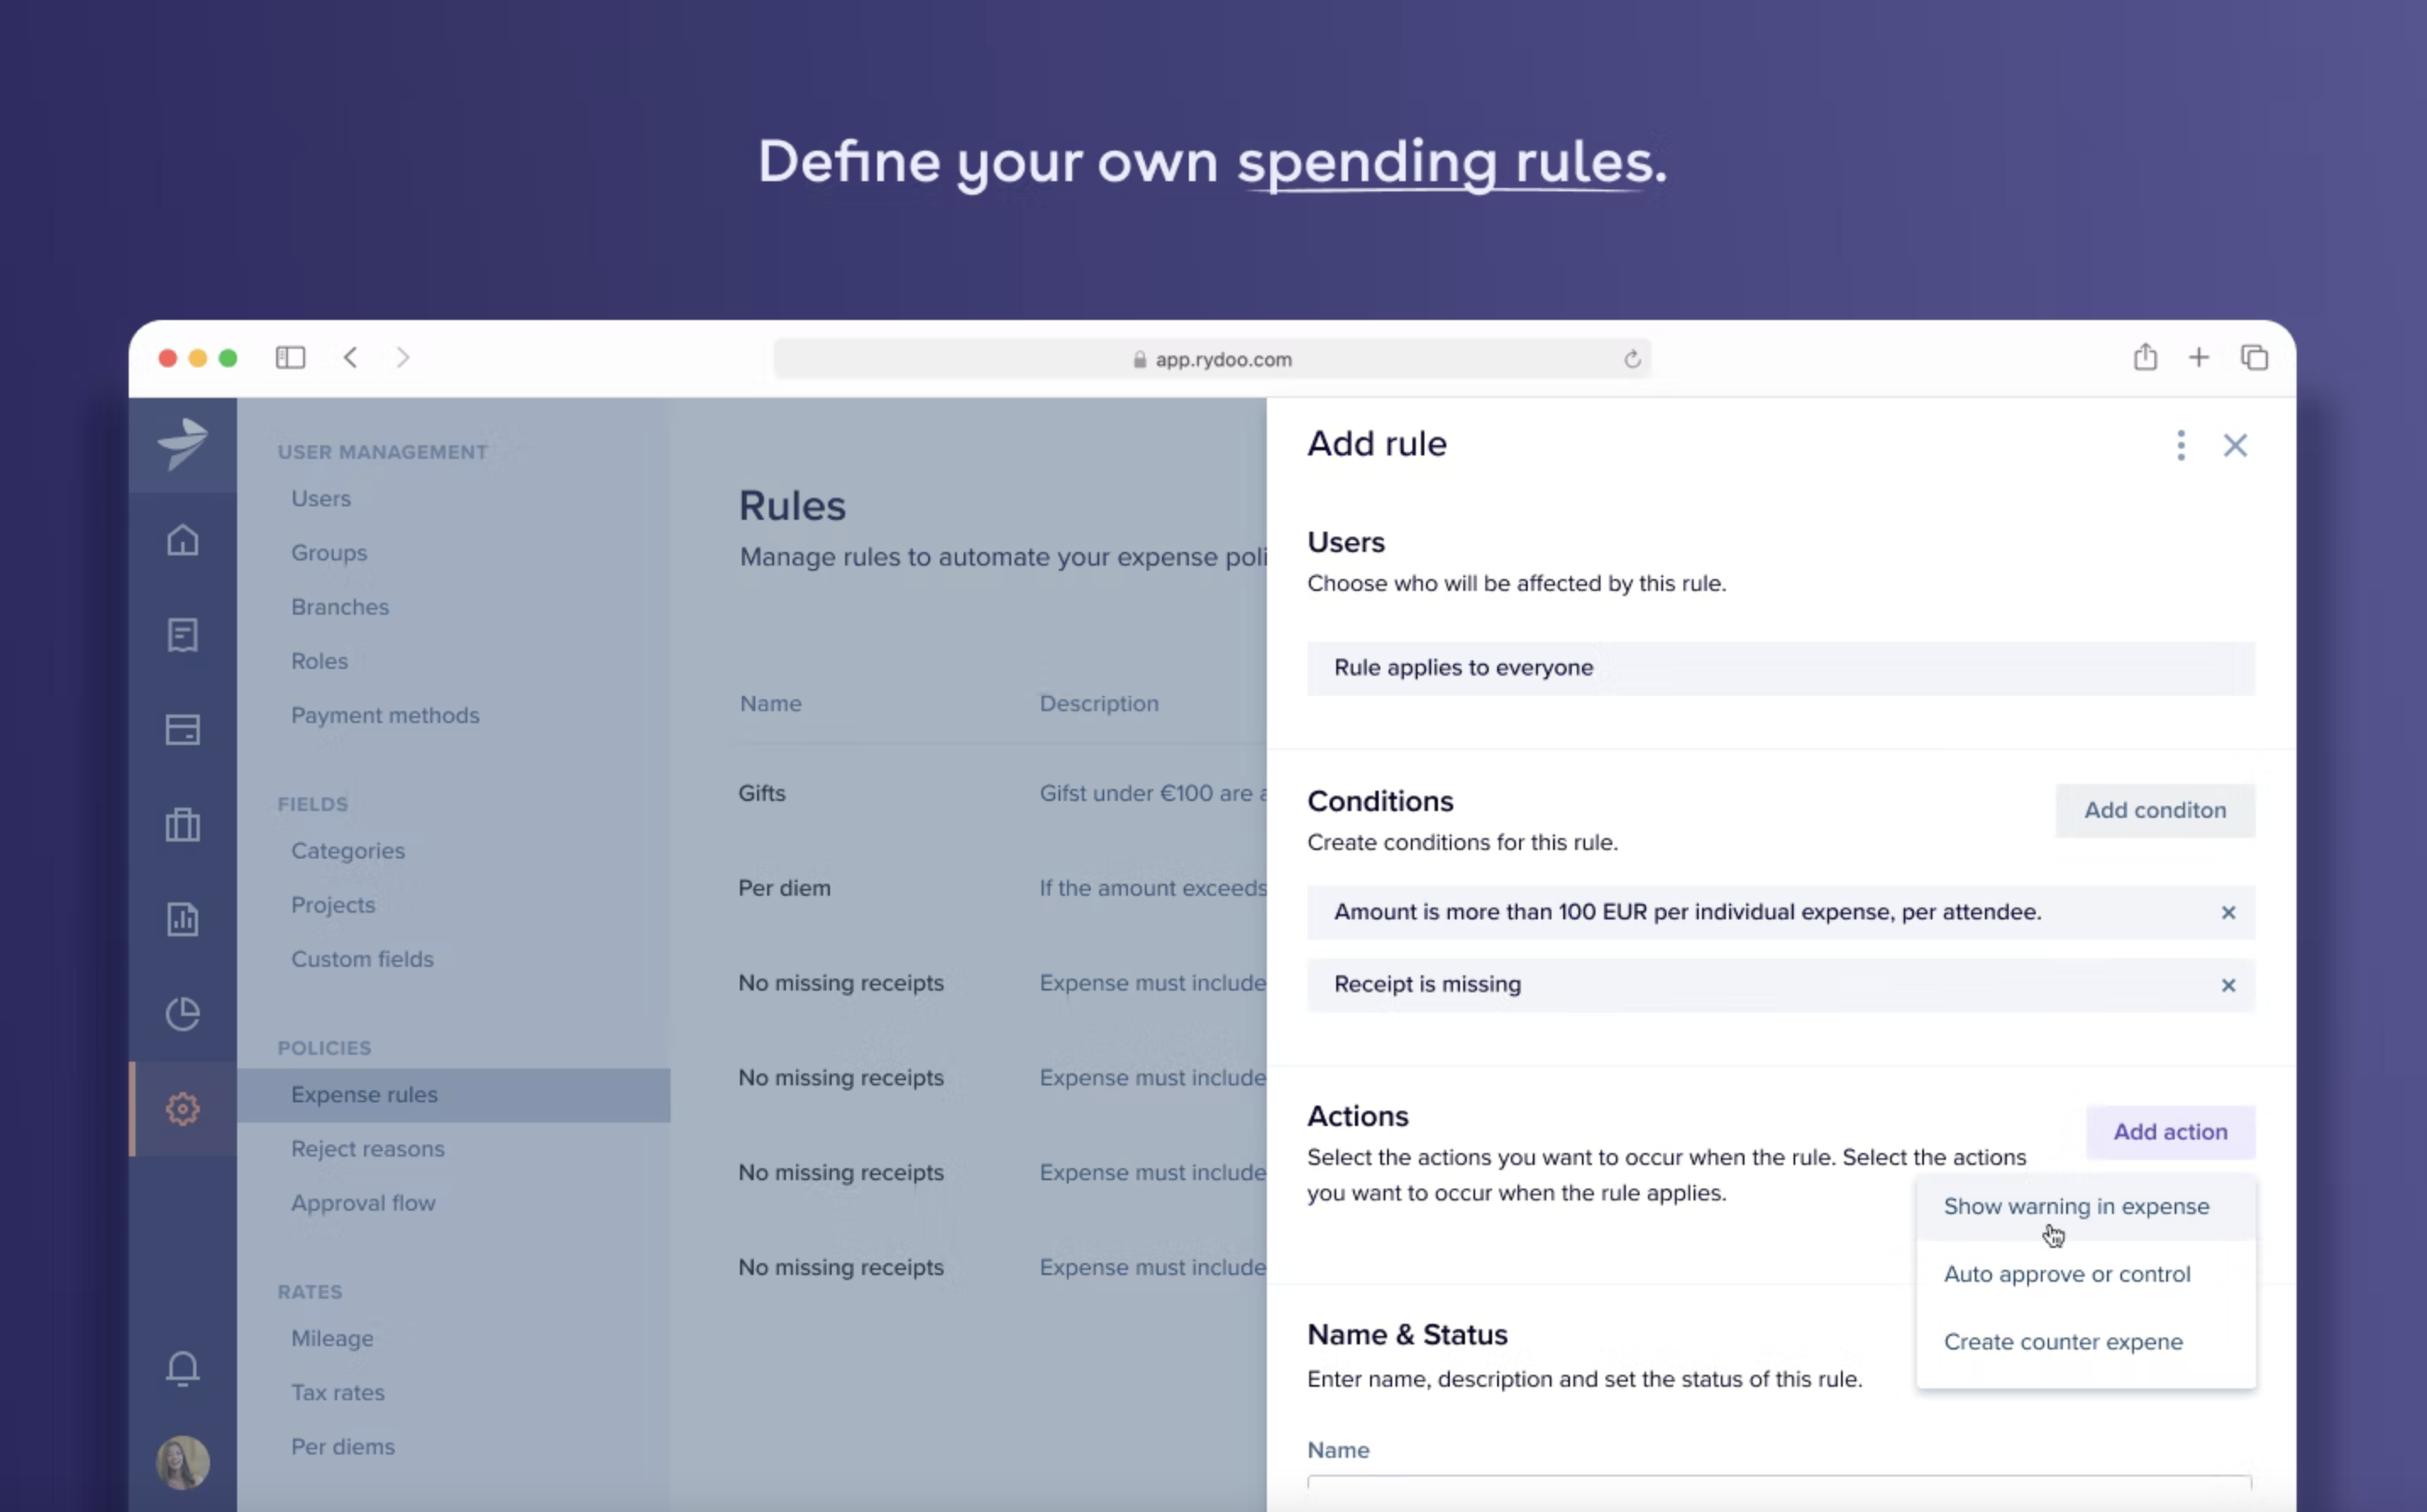 Define your own spending rules